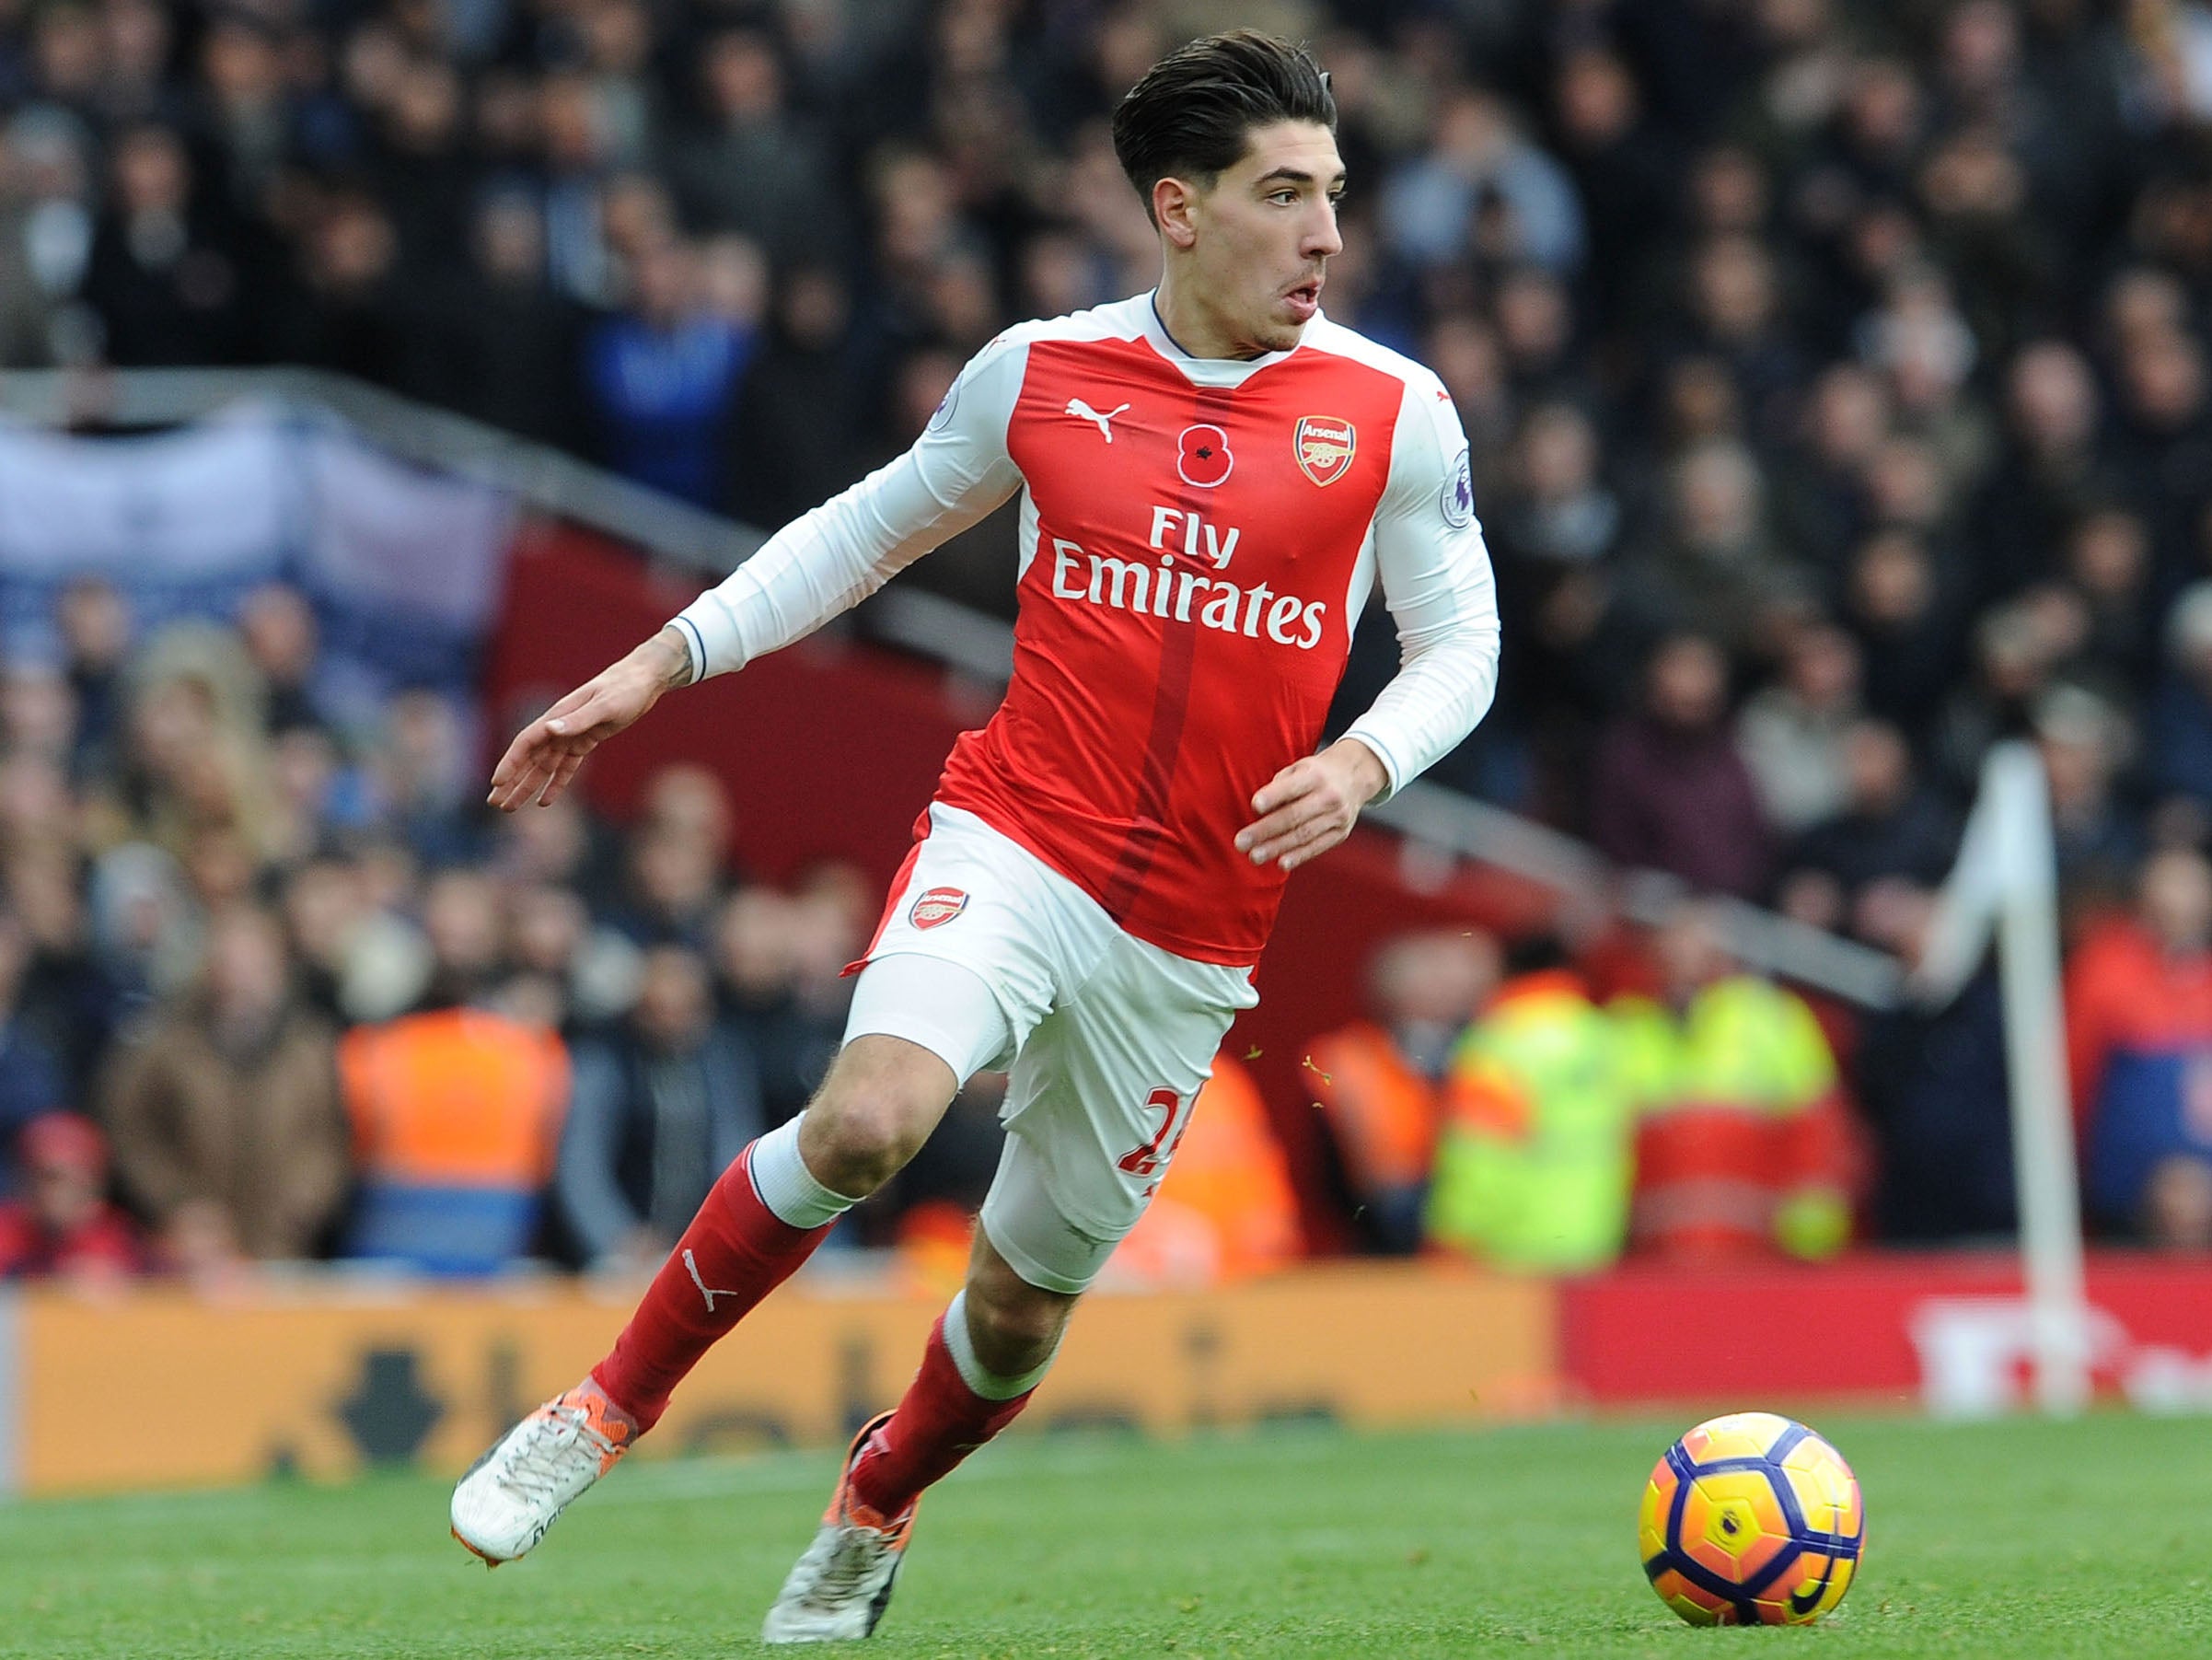 Héctor Bellerin is one of the players who will donate a day’s wages to the cause of ending youth homelessness